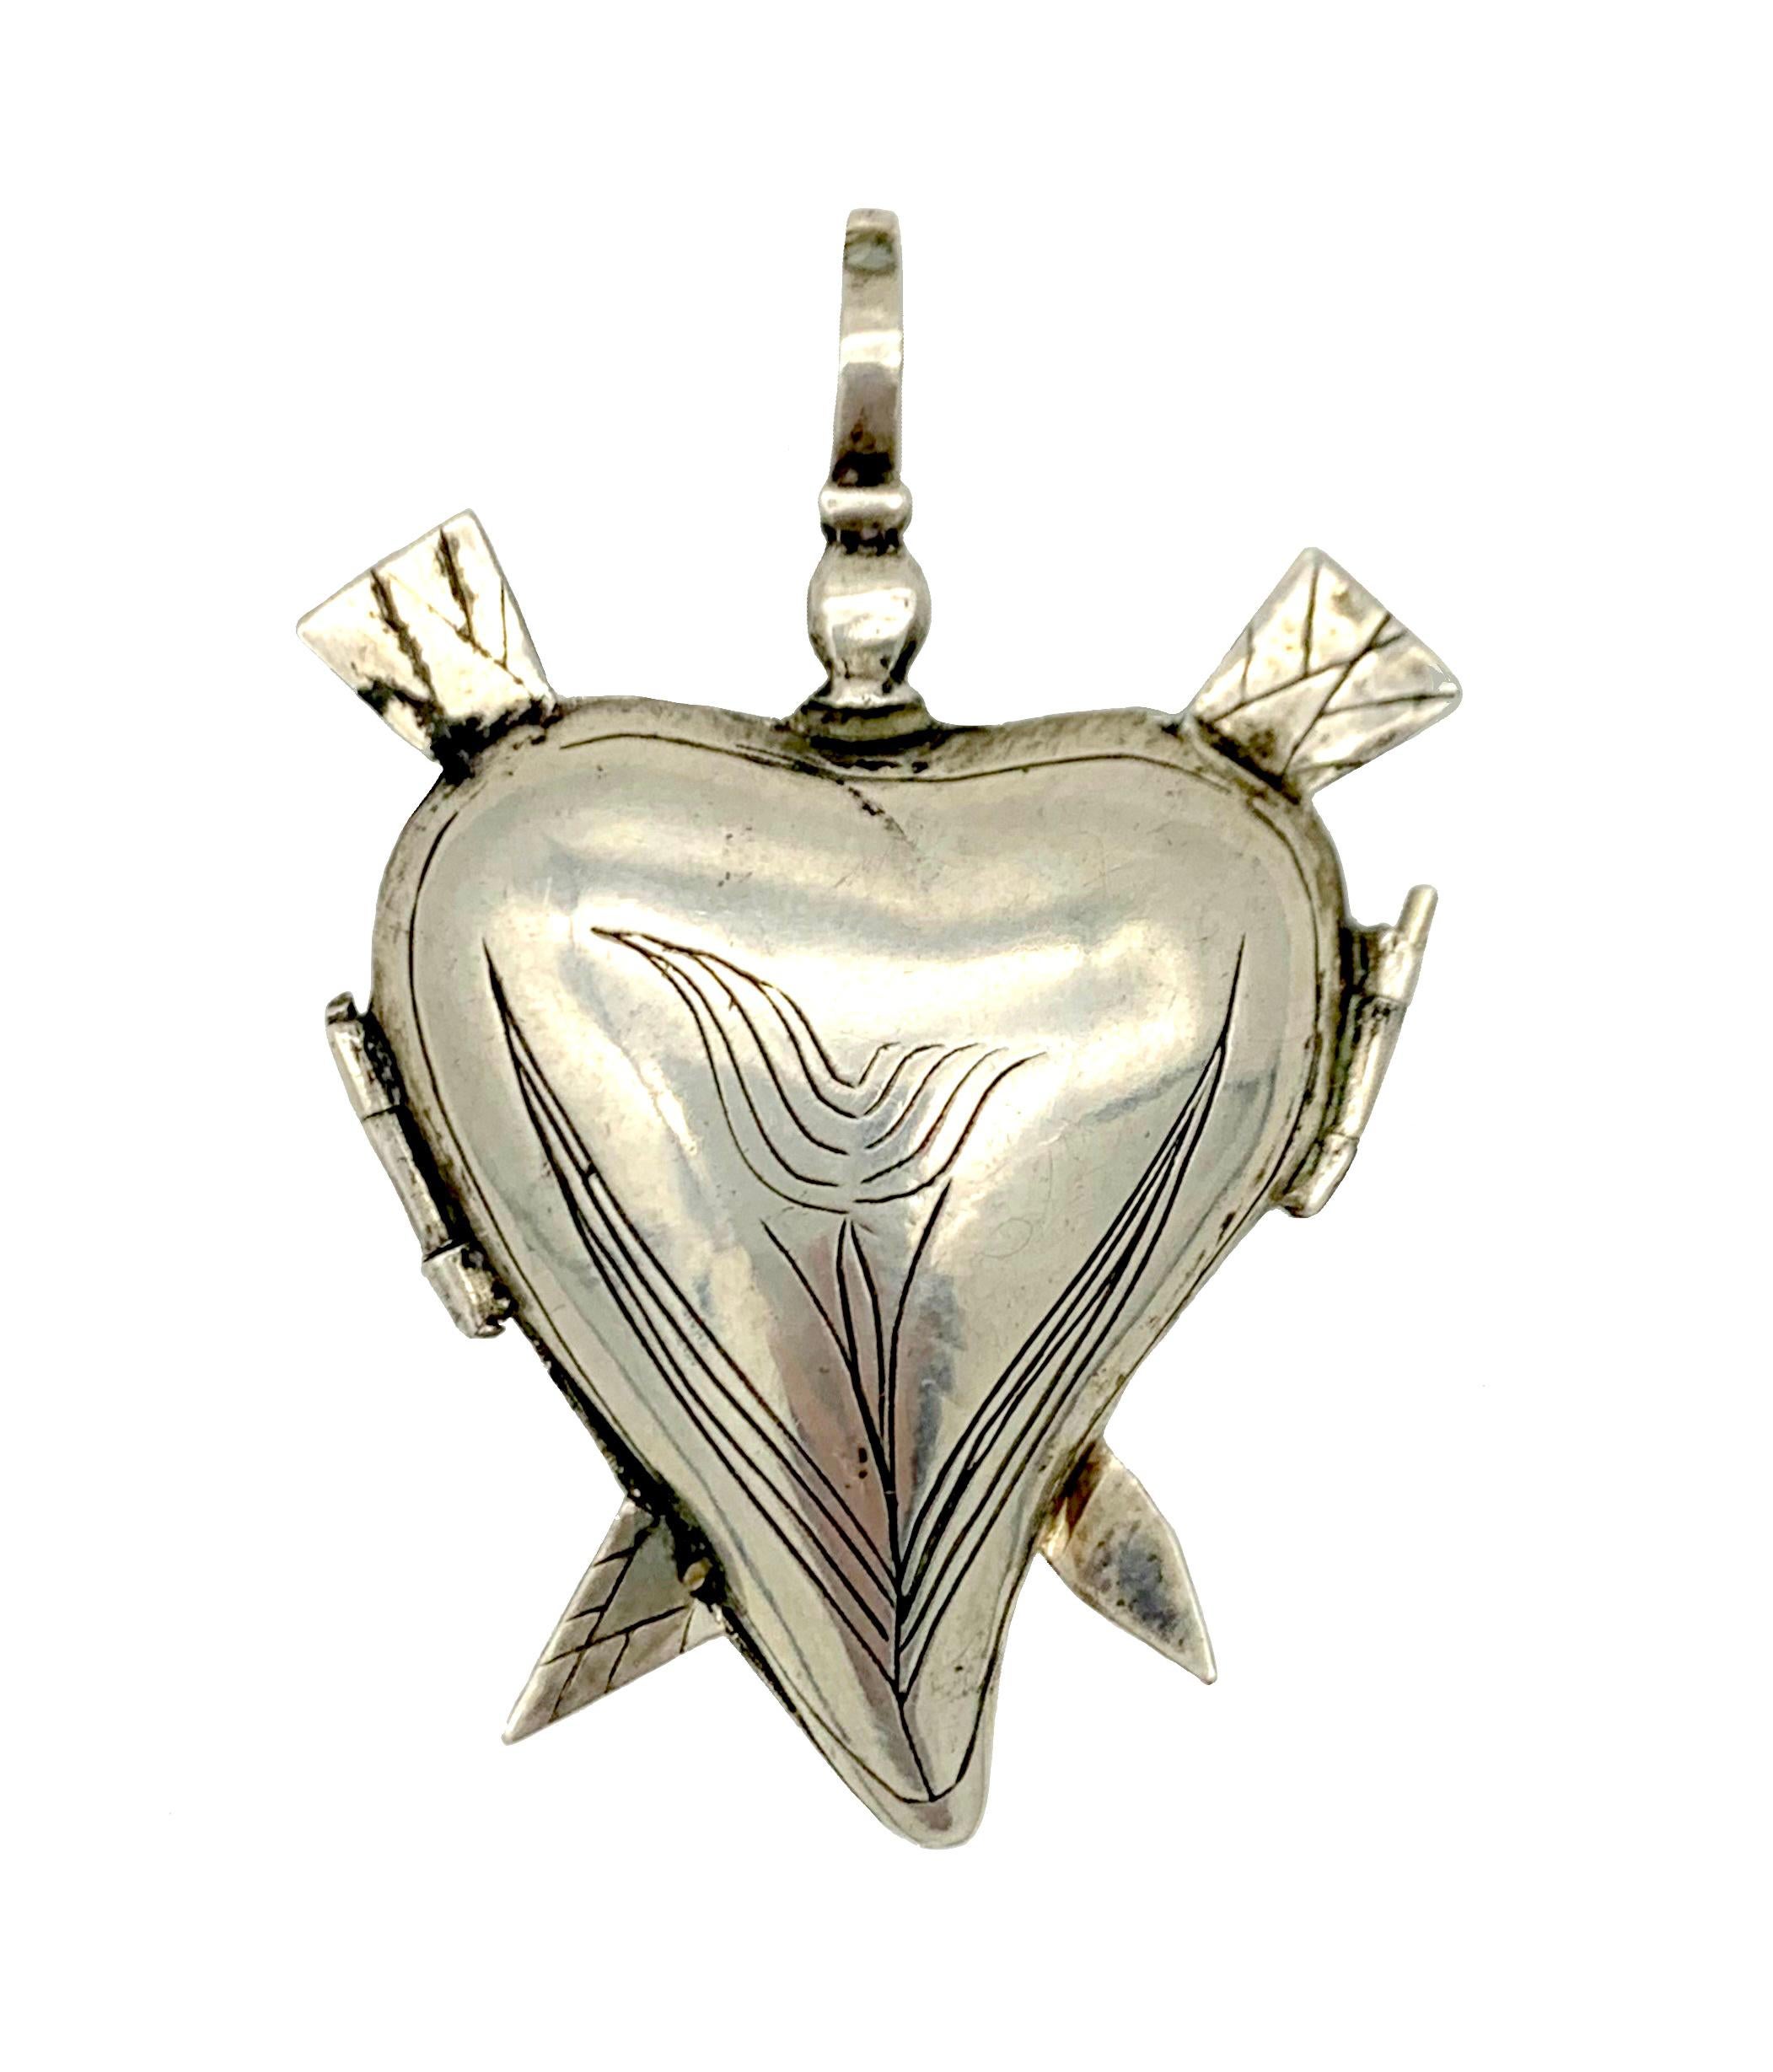 The hinged heart locket pierced y two arrows is closed my means of a silver pin.  